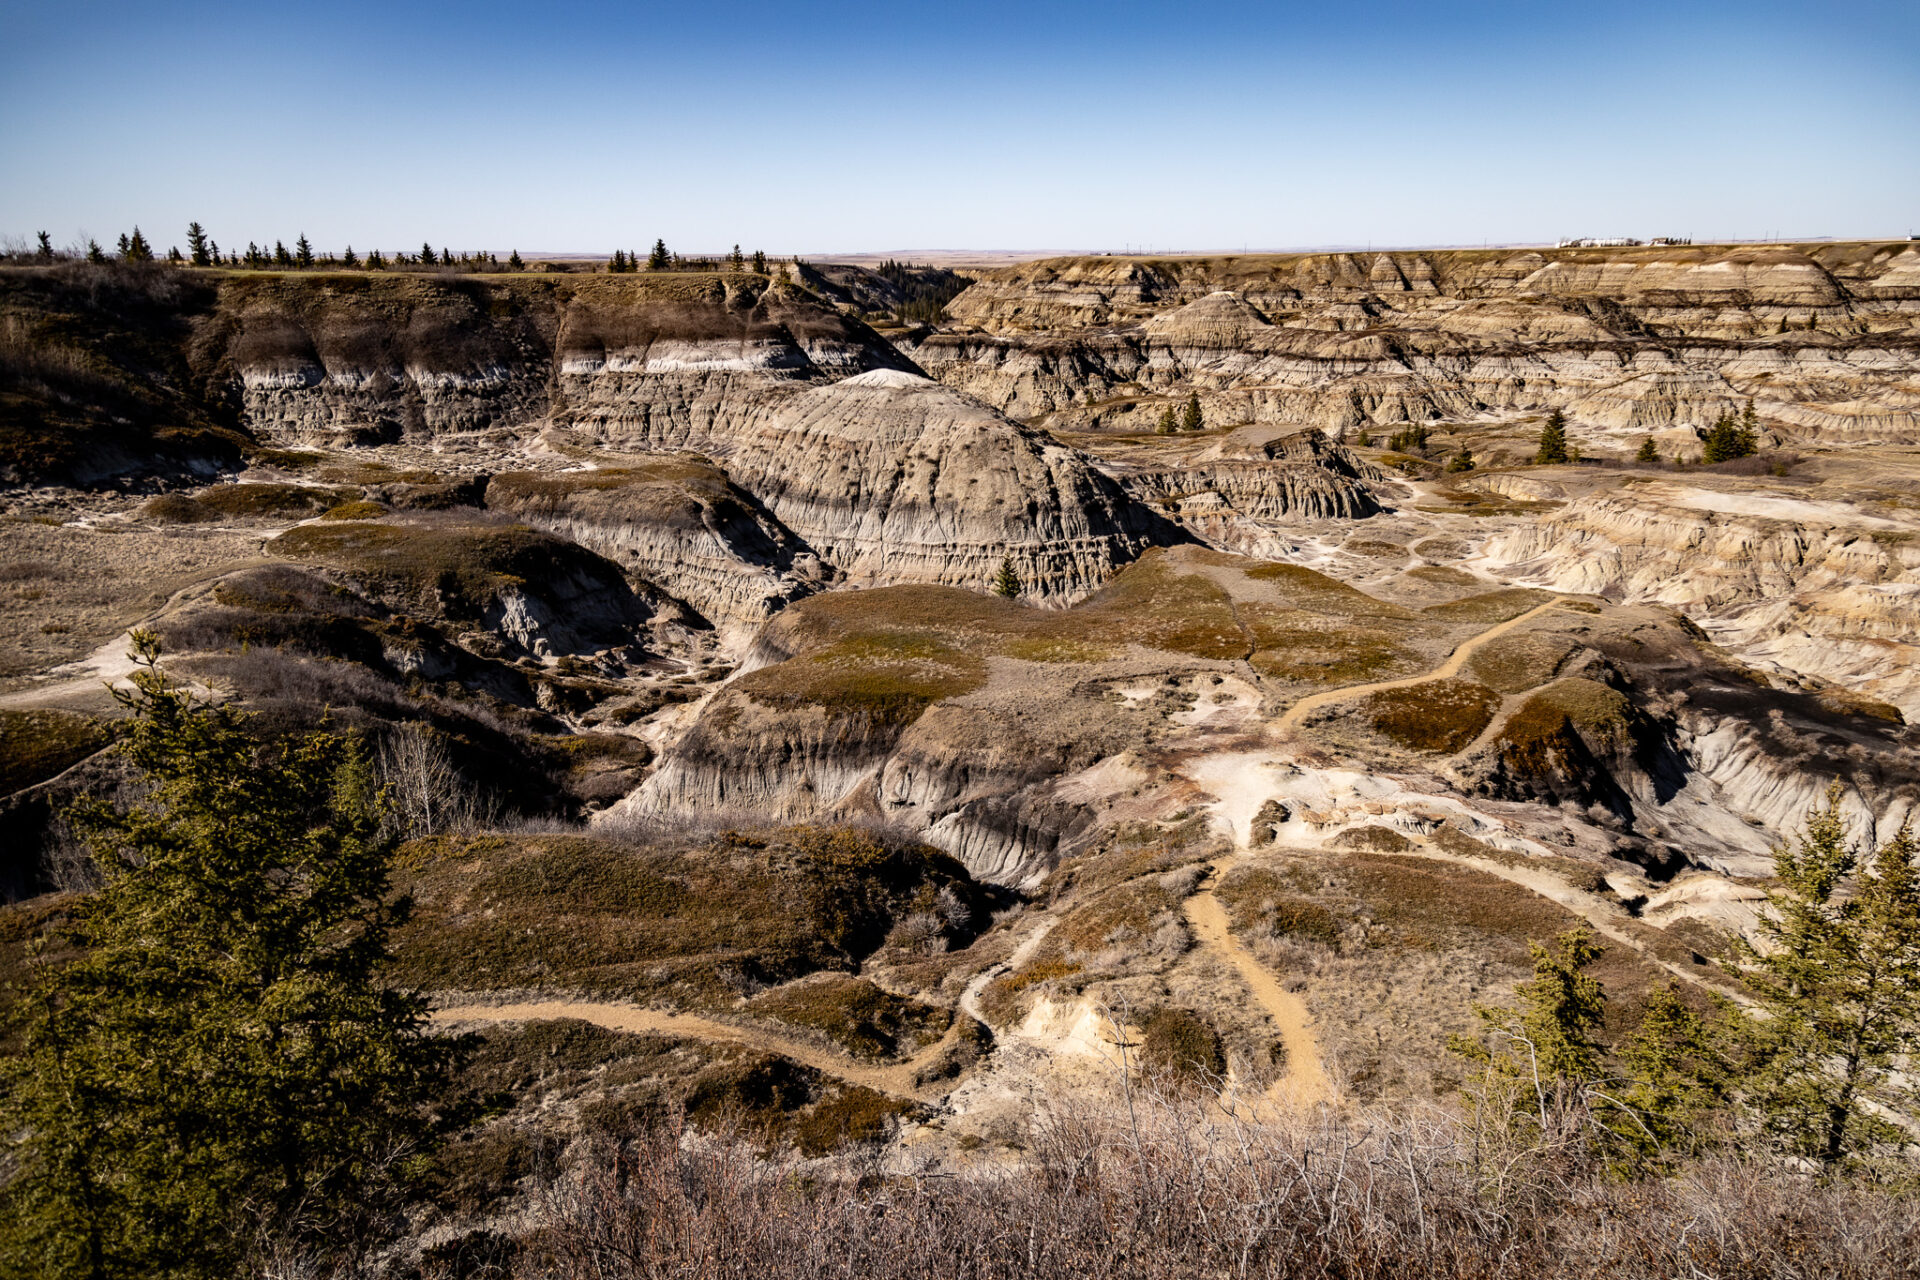 how to spend 1 day in Drumheller